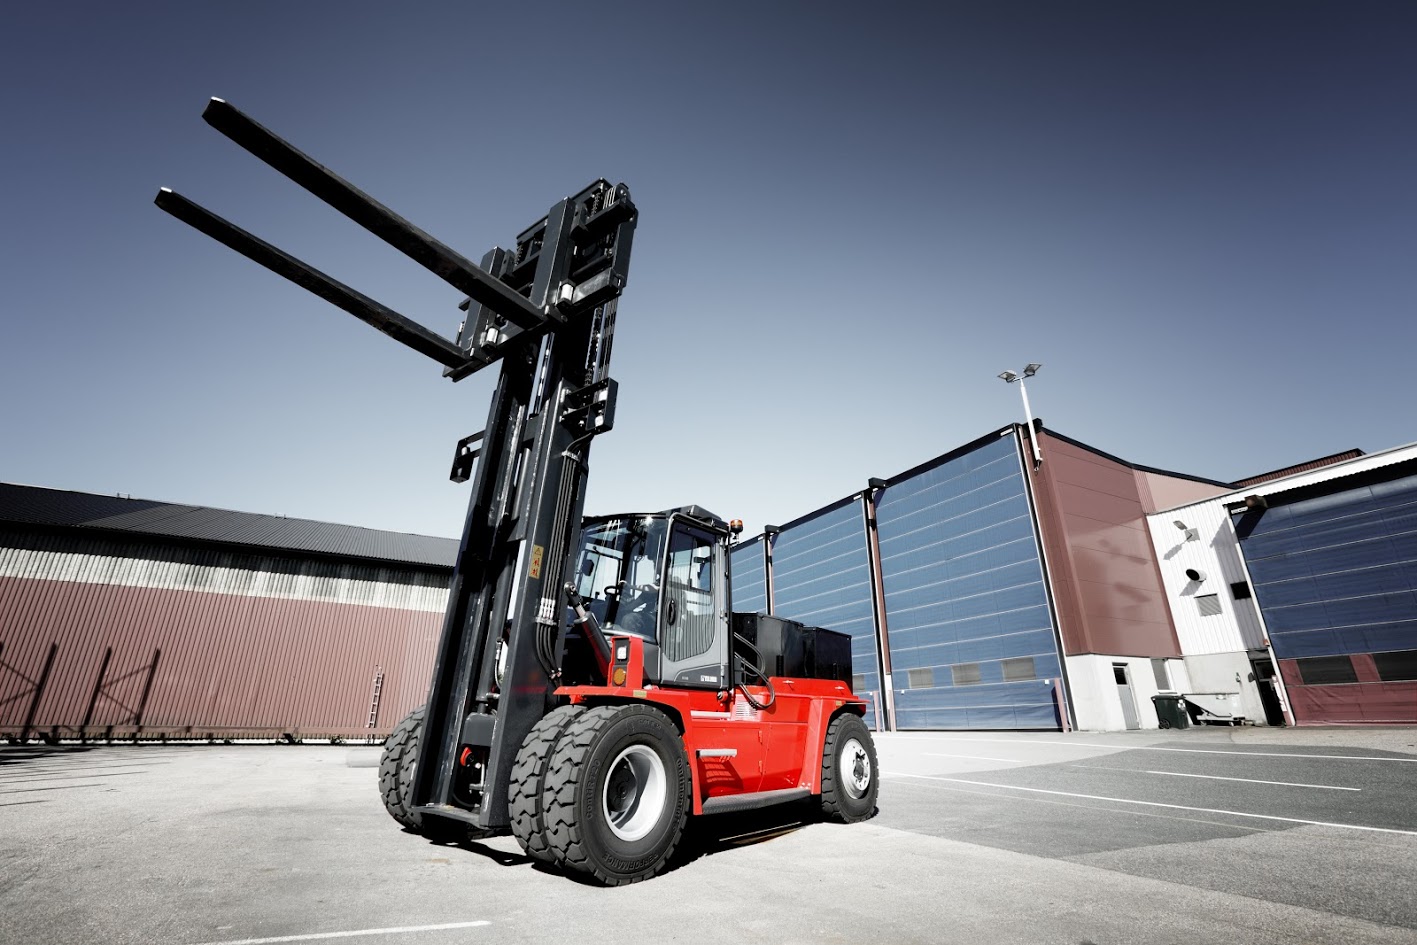 New Kalmar electric forklift: How to get the power into a large truck - Friday, 21.09.2018